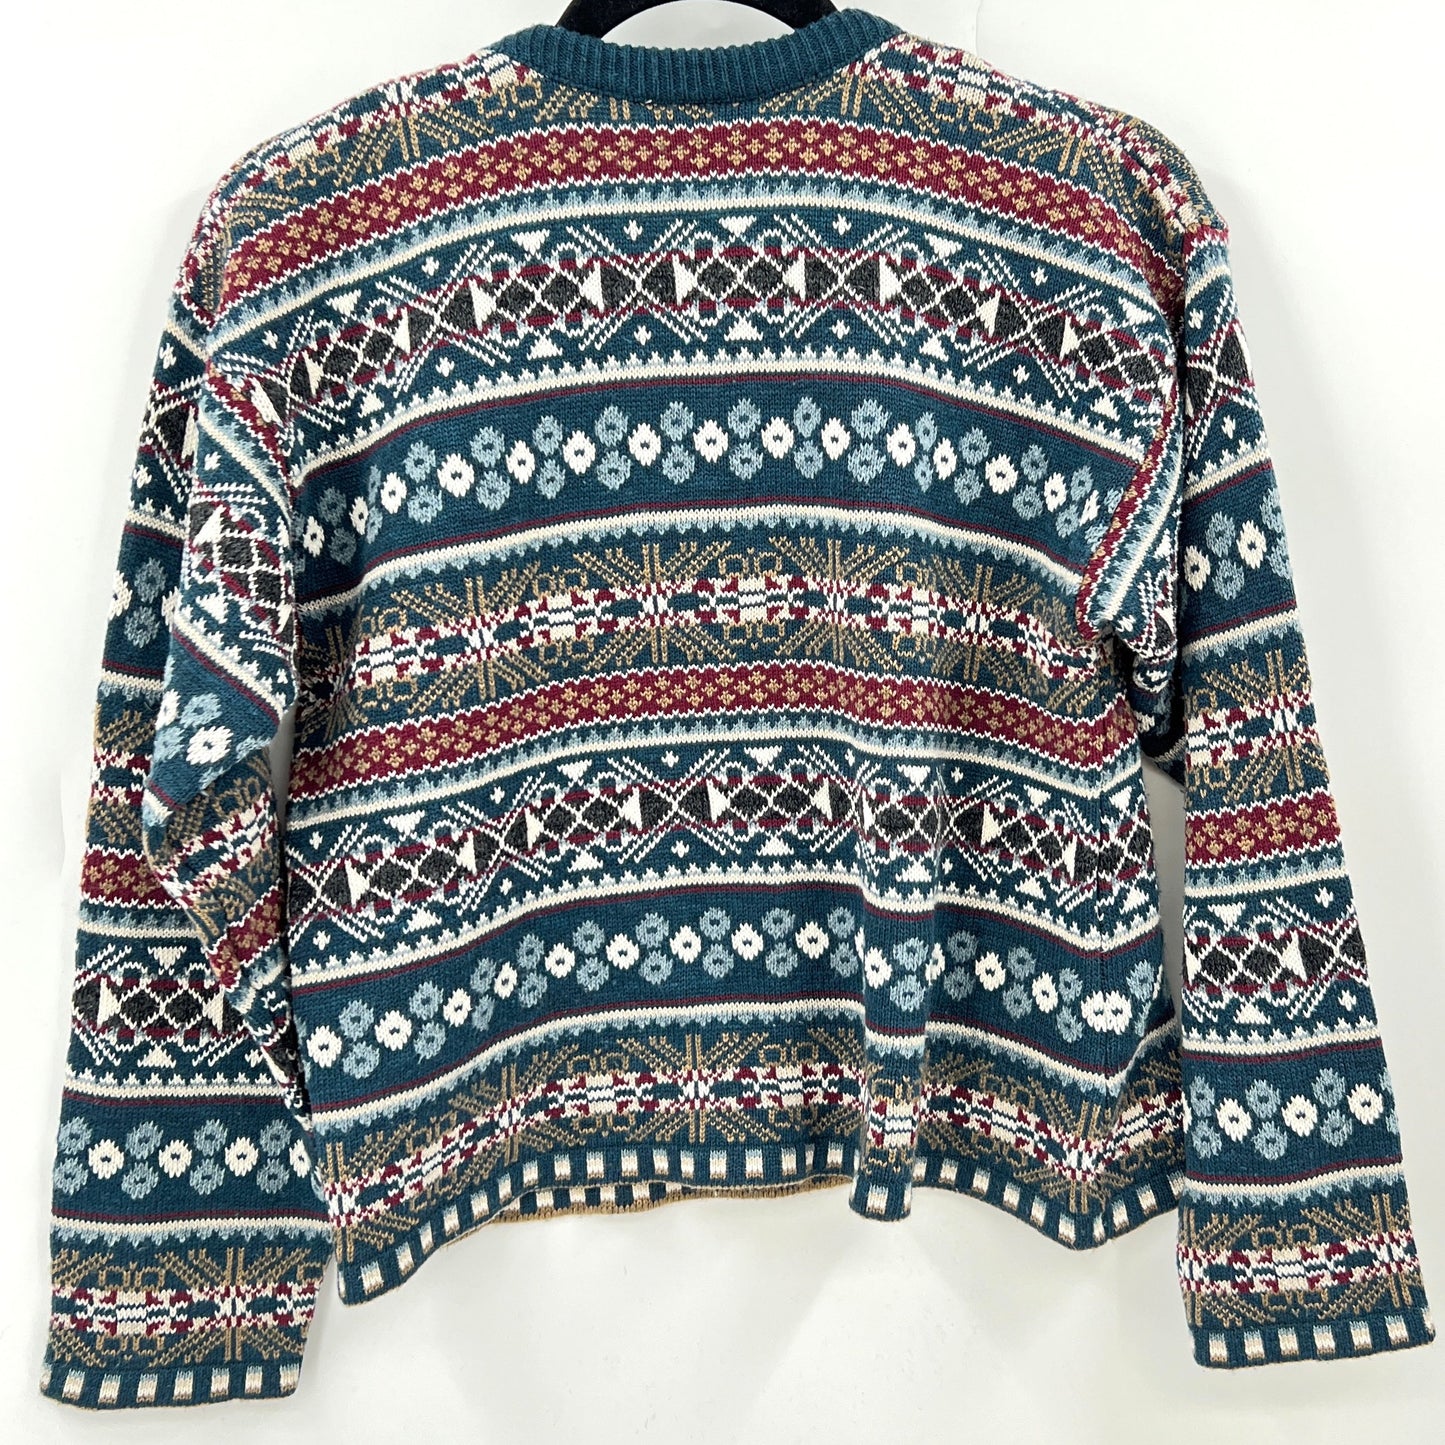 SOLD. Vintage Grace Cropped Sweater XS/S